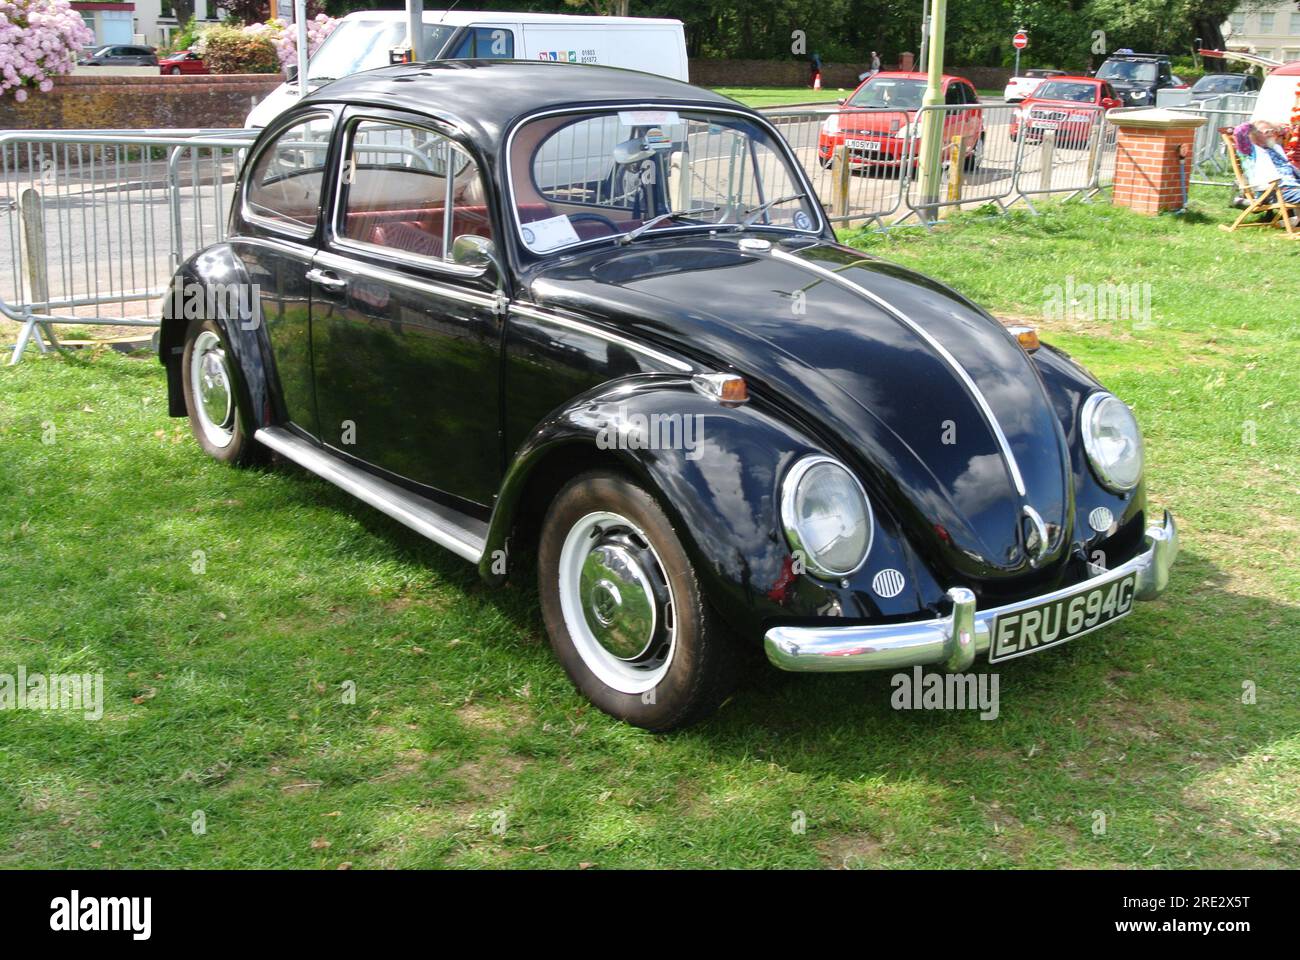 A classic 1965 Volkswagen 1300 car parked up on display at the Riviera classic car show, Paignton, Devon, England. Stock Photo